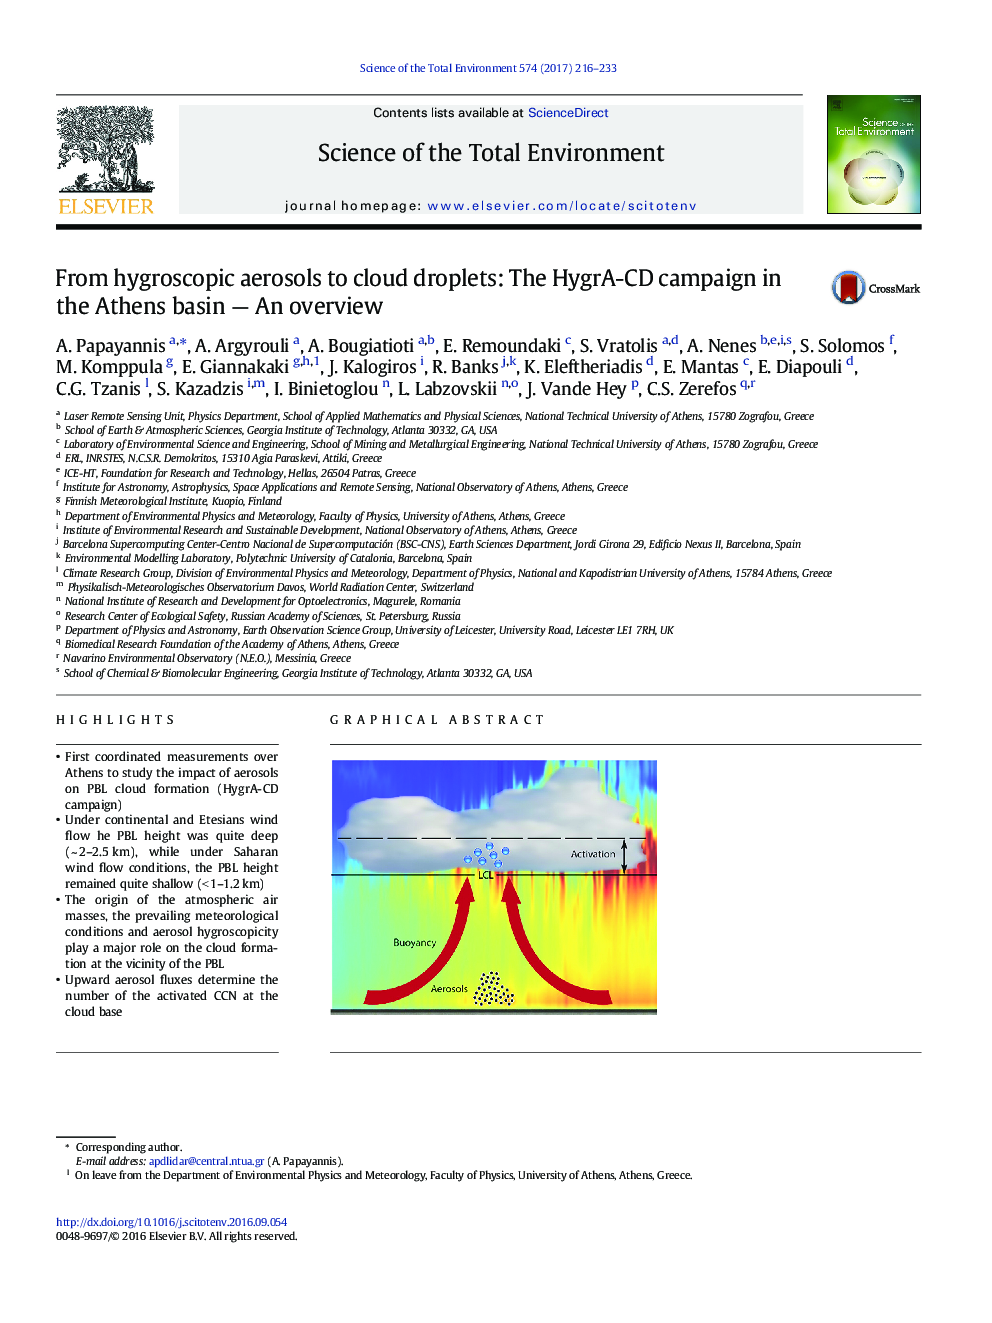 An overview from hygroscopic aerosols to cloud droplets: The HygrA-CD campaign in the Athens basin